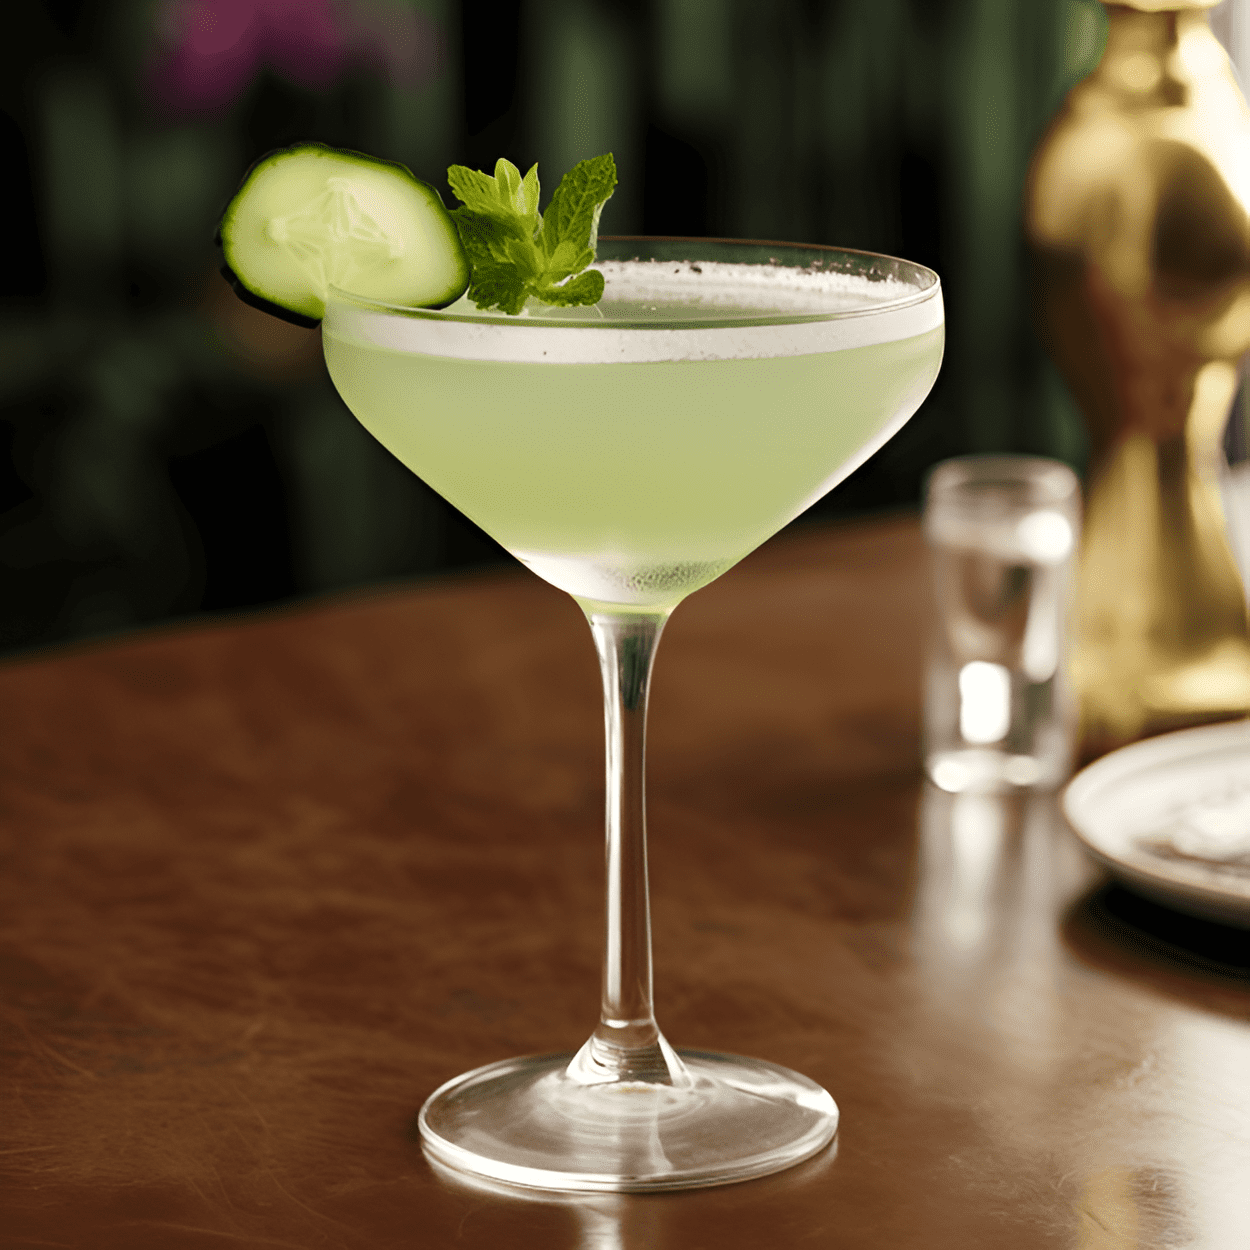 Eastside Cocktail Recipe - The Eastside cocktail is a refreshing, crisp, and slightly sweet drink with a hint of tartness from the lime and a unique flavor from the cucumber and mint.